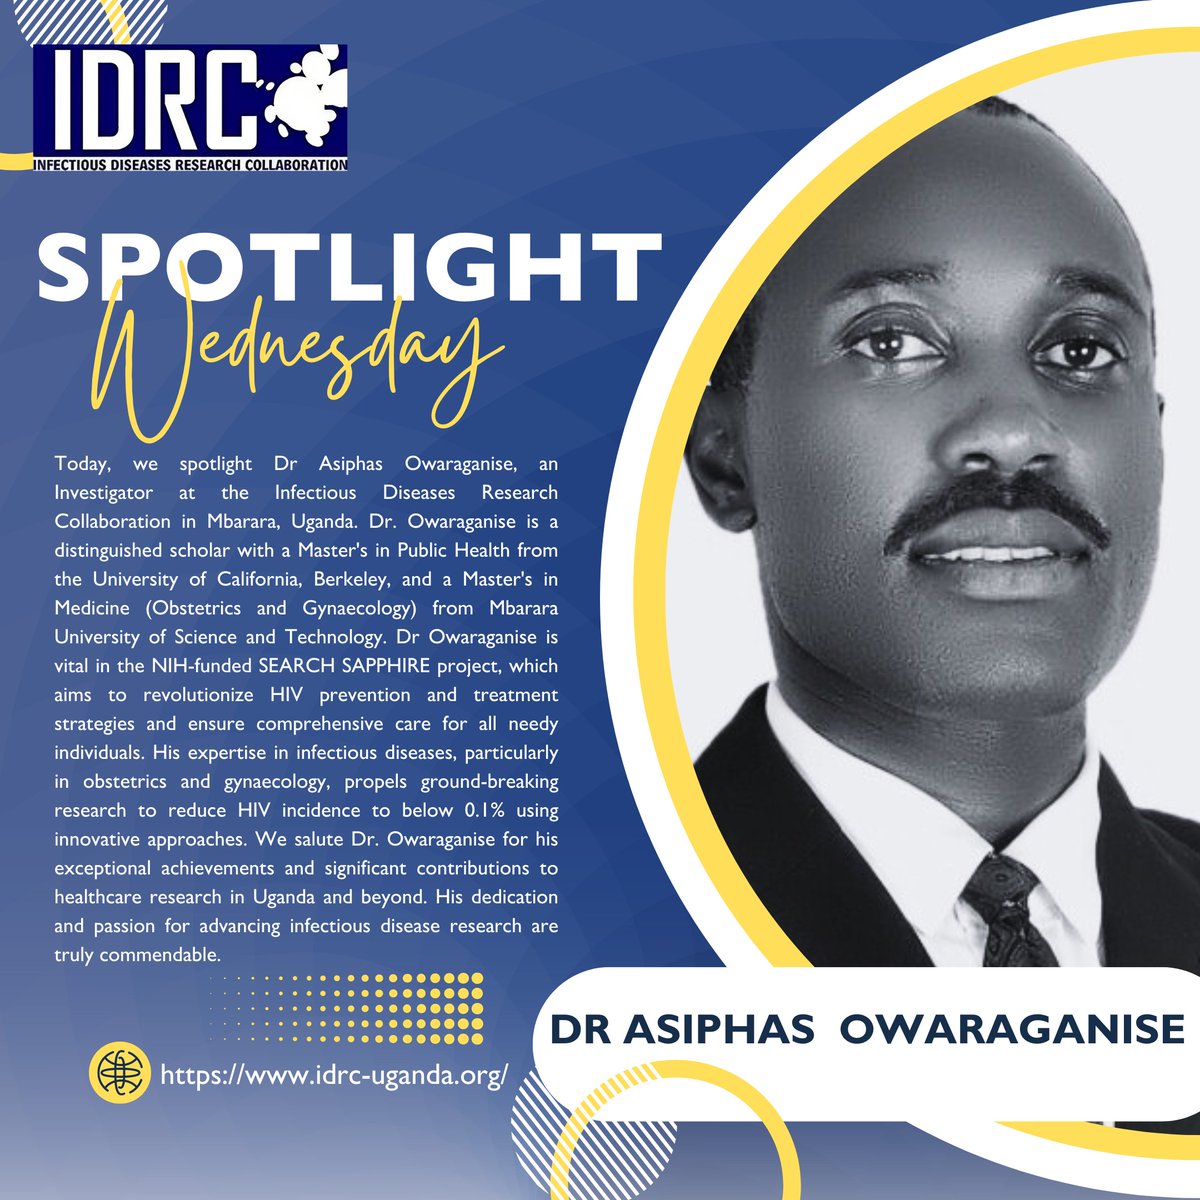 It's #SpotlightWednesday and we're shining a light on the inspiring Dr. @asiphas at @IDRC_Uganda ! 🌟His dedication to HIV prevention is making a real difference in the fight against the virus. #spotlight